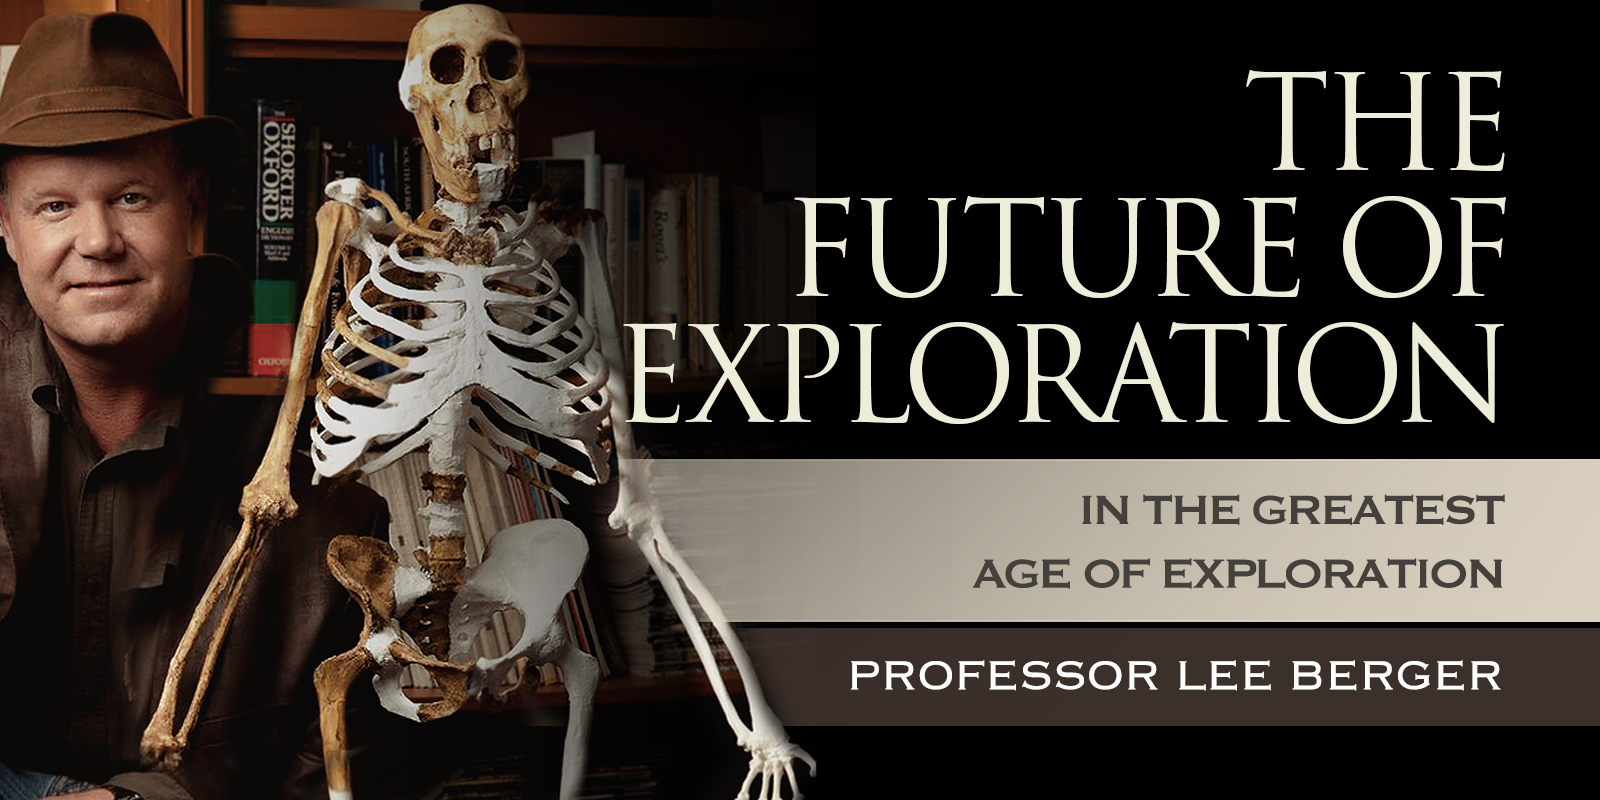 The Future of Exploration in the Greatest Age of Exploration